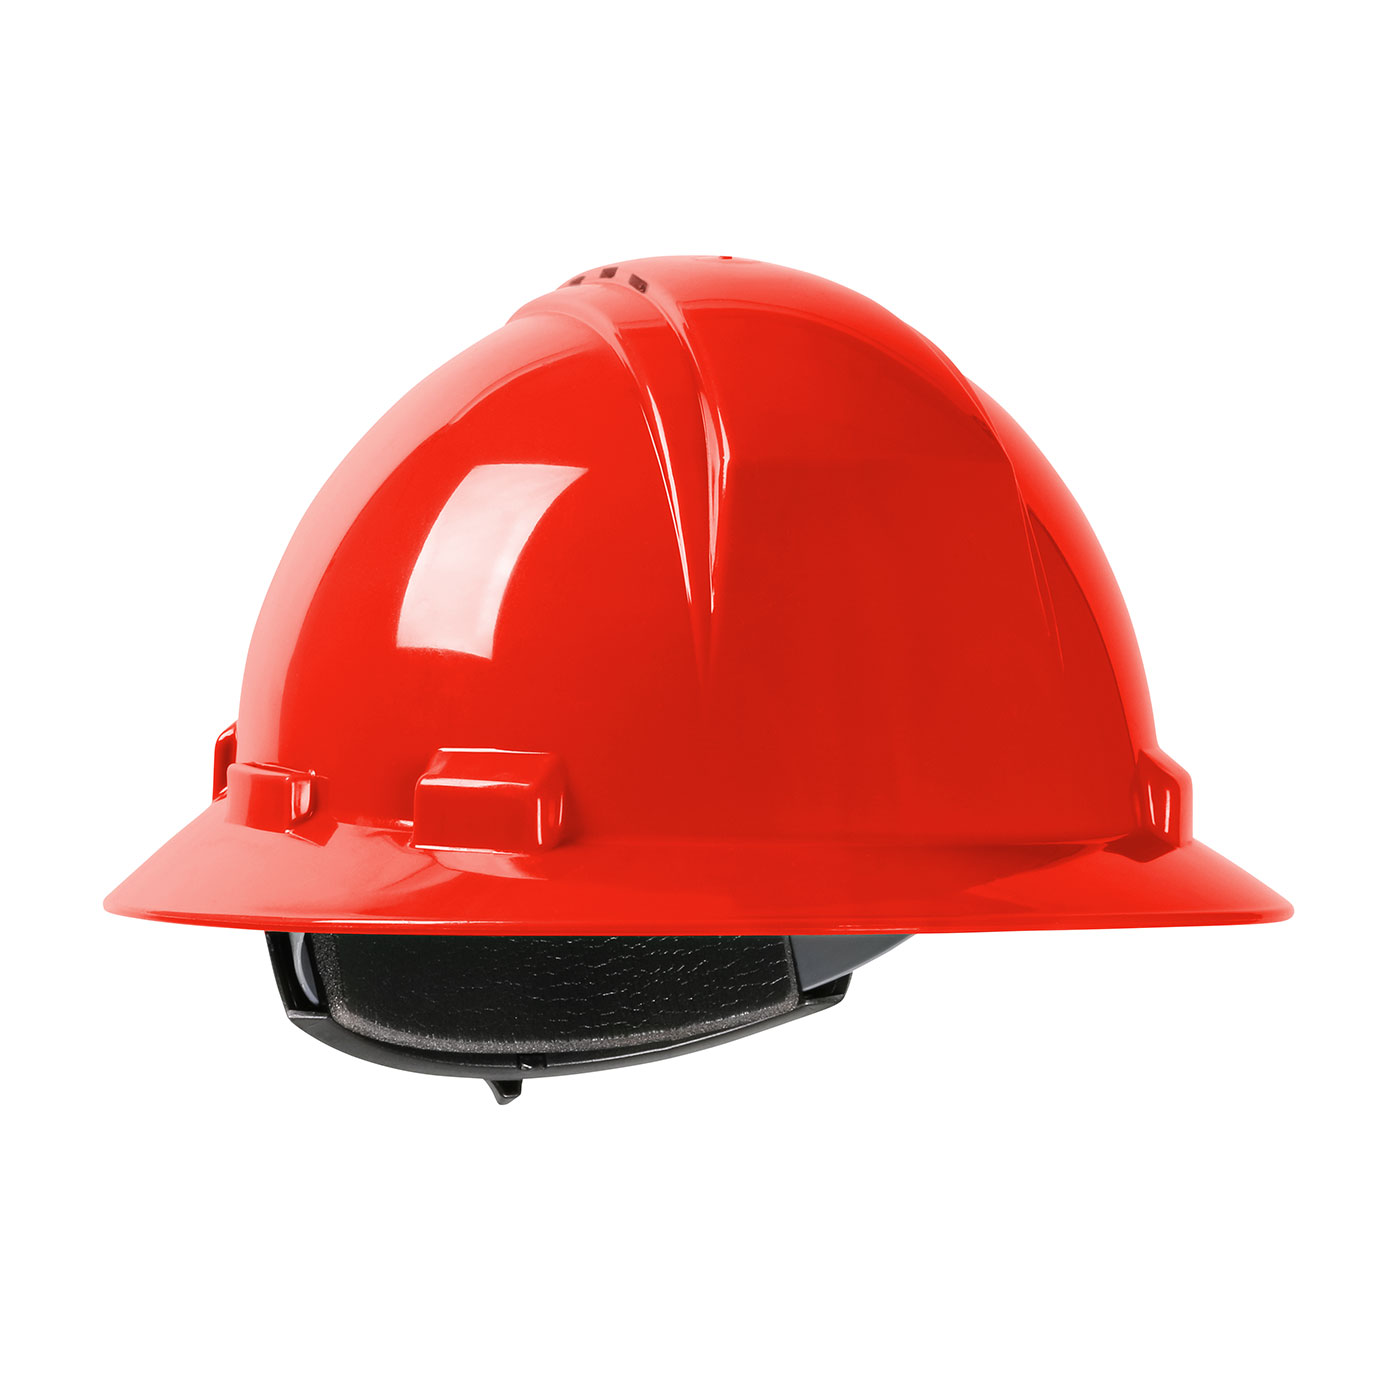 280-HP261RV PIP® Dynamic Kilimanjaro™ Vented Full Brim Hard Hat with HDPE Shell, 4-Point Textile Suspension and Wheel Ratchet Adjustment- Red